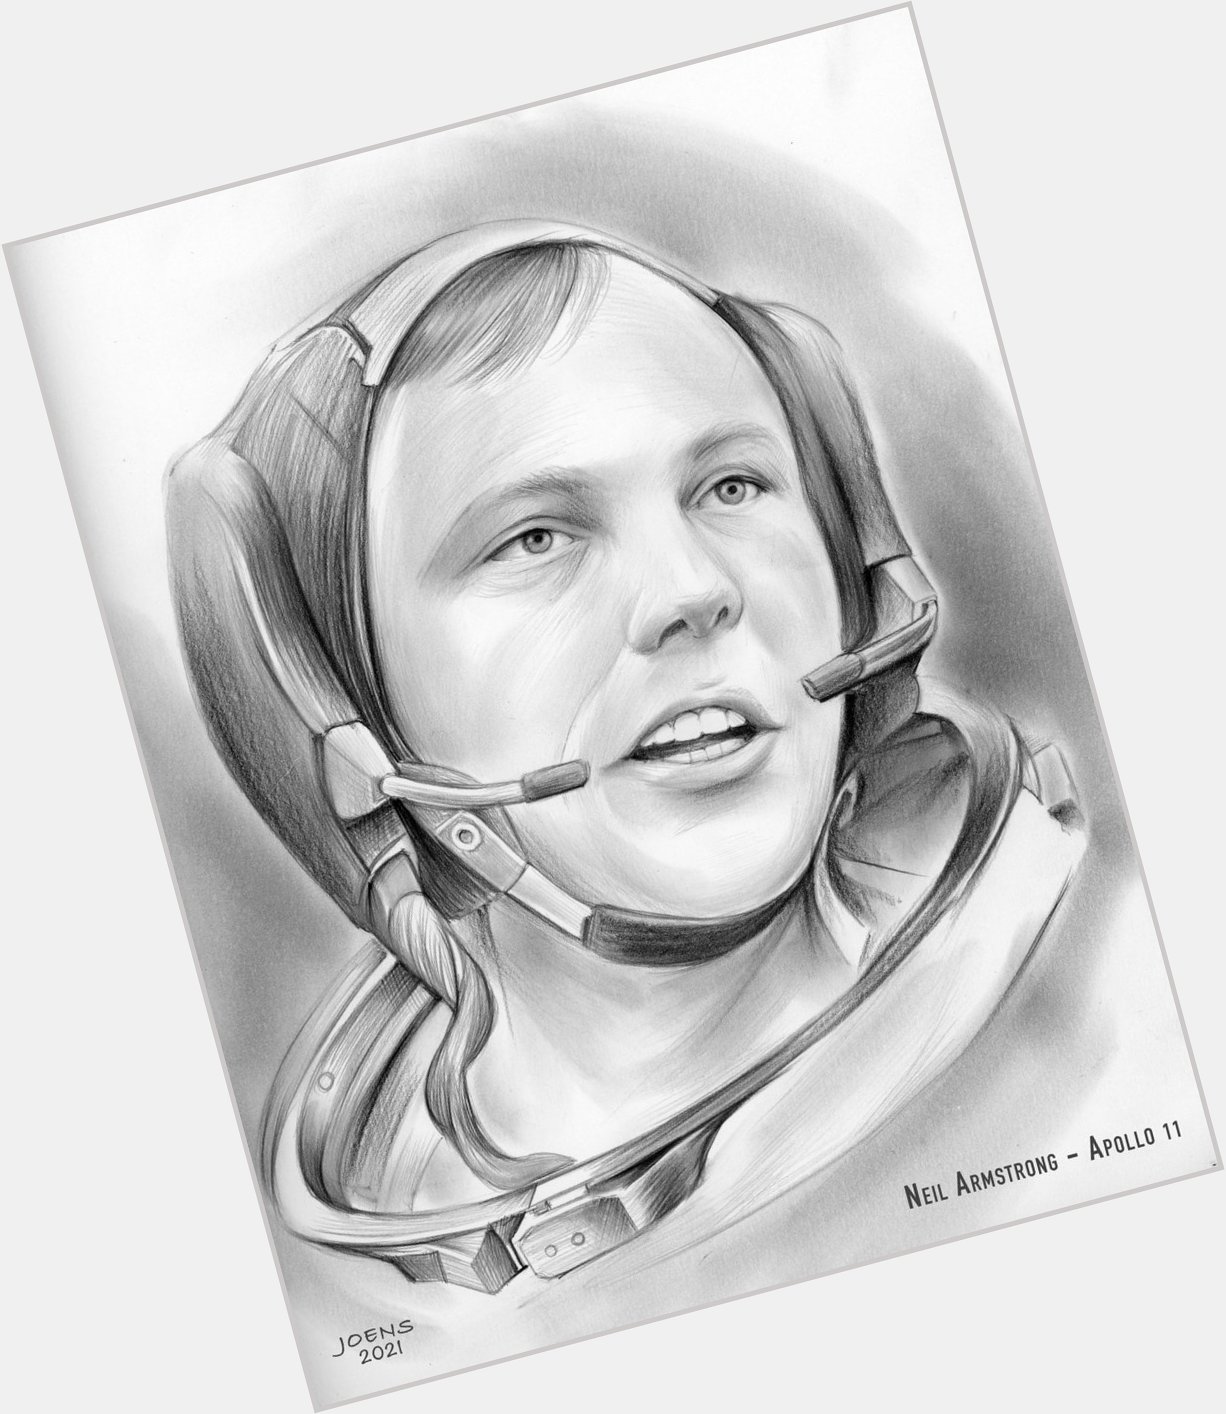 Happy birthday Neil Armstrong - born August 5, 1930 